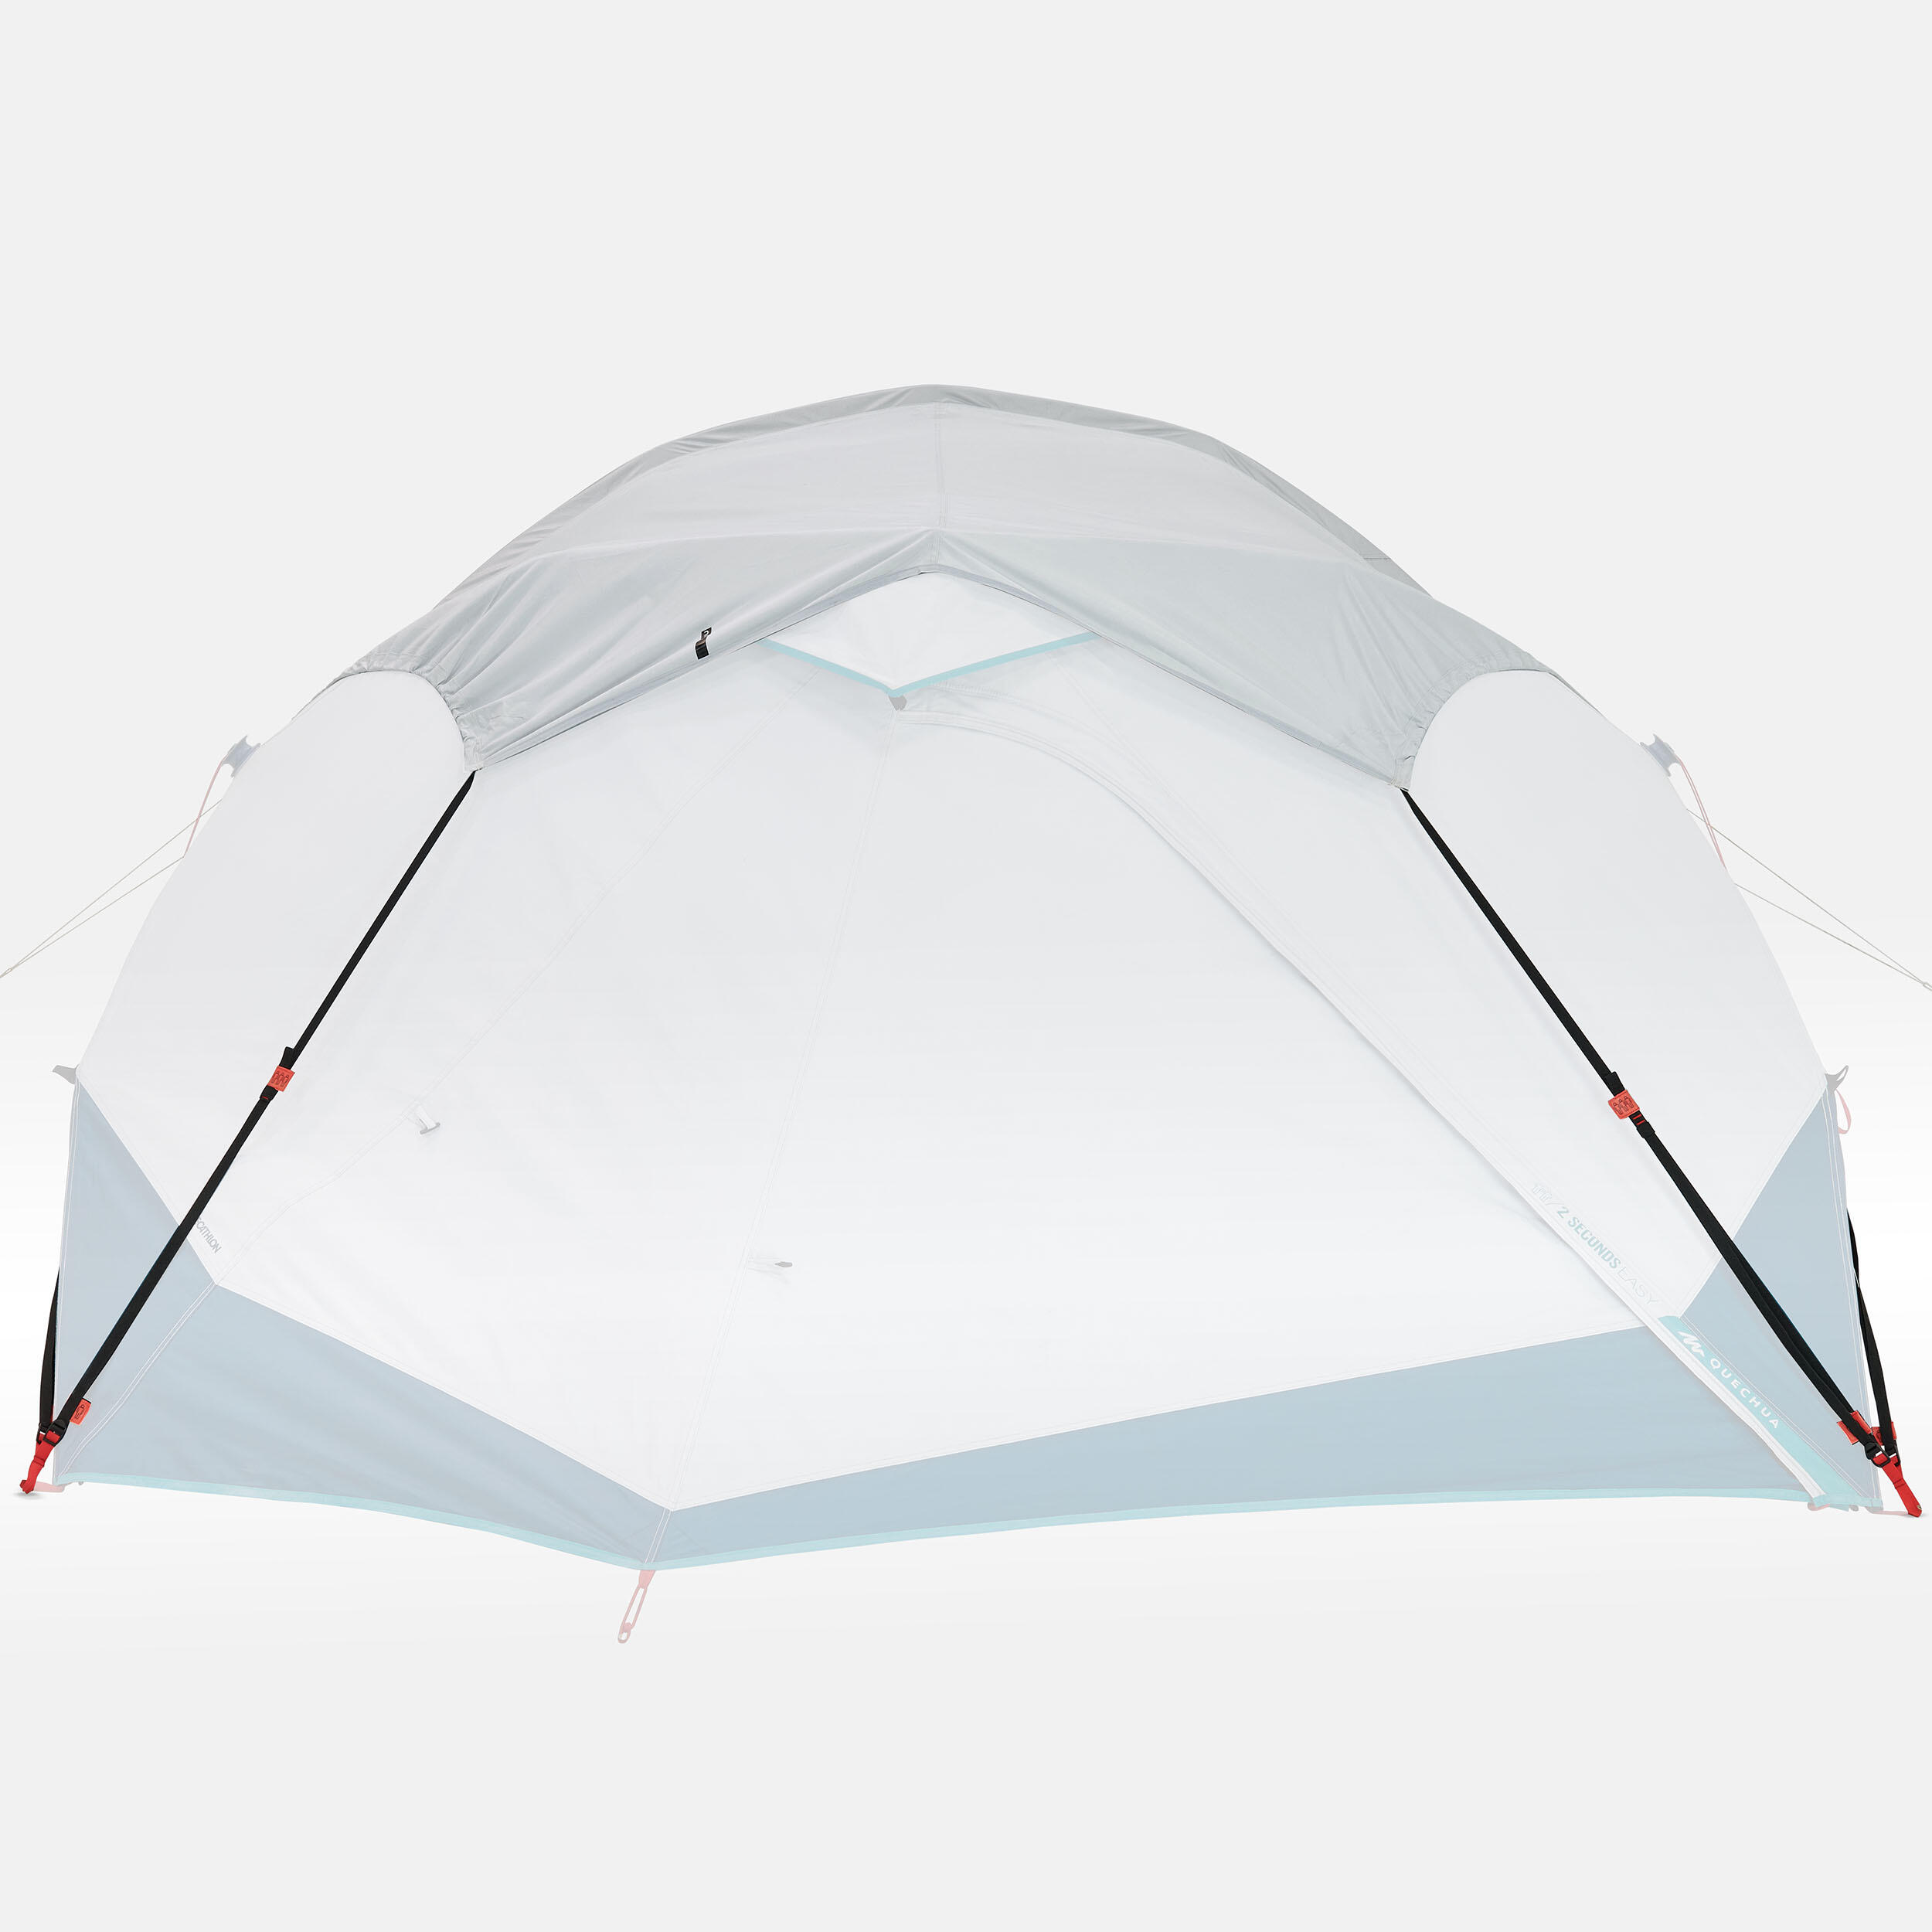 Camping awning - 2 Seconds EASY - Fresh 10/20